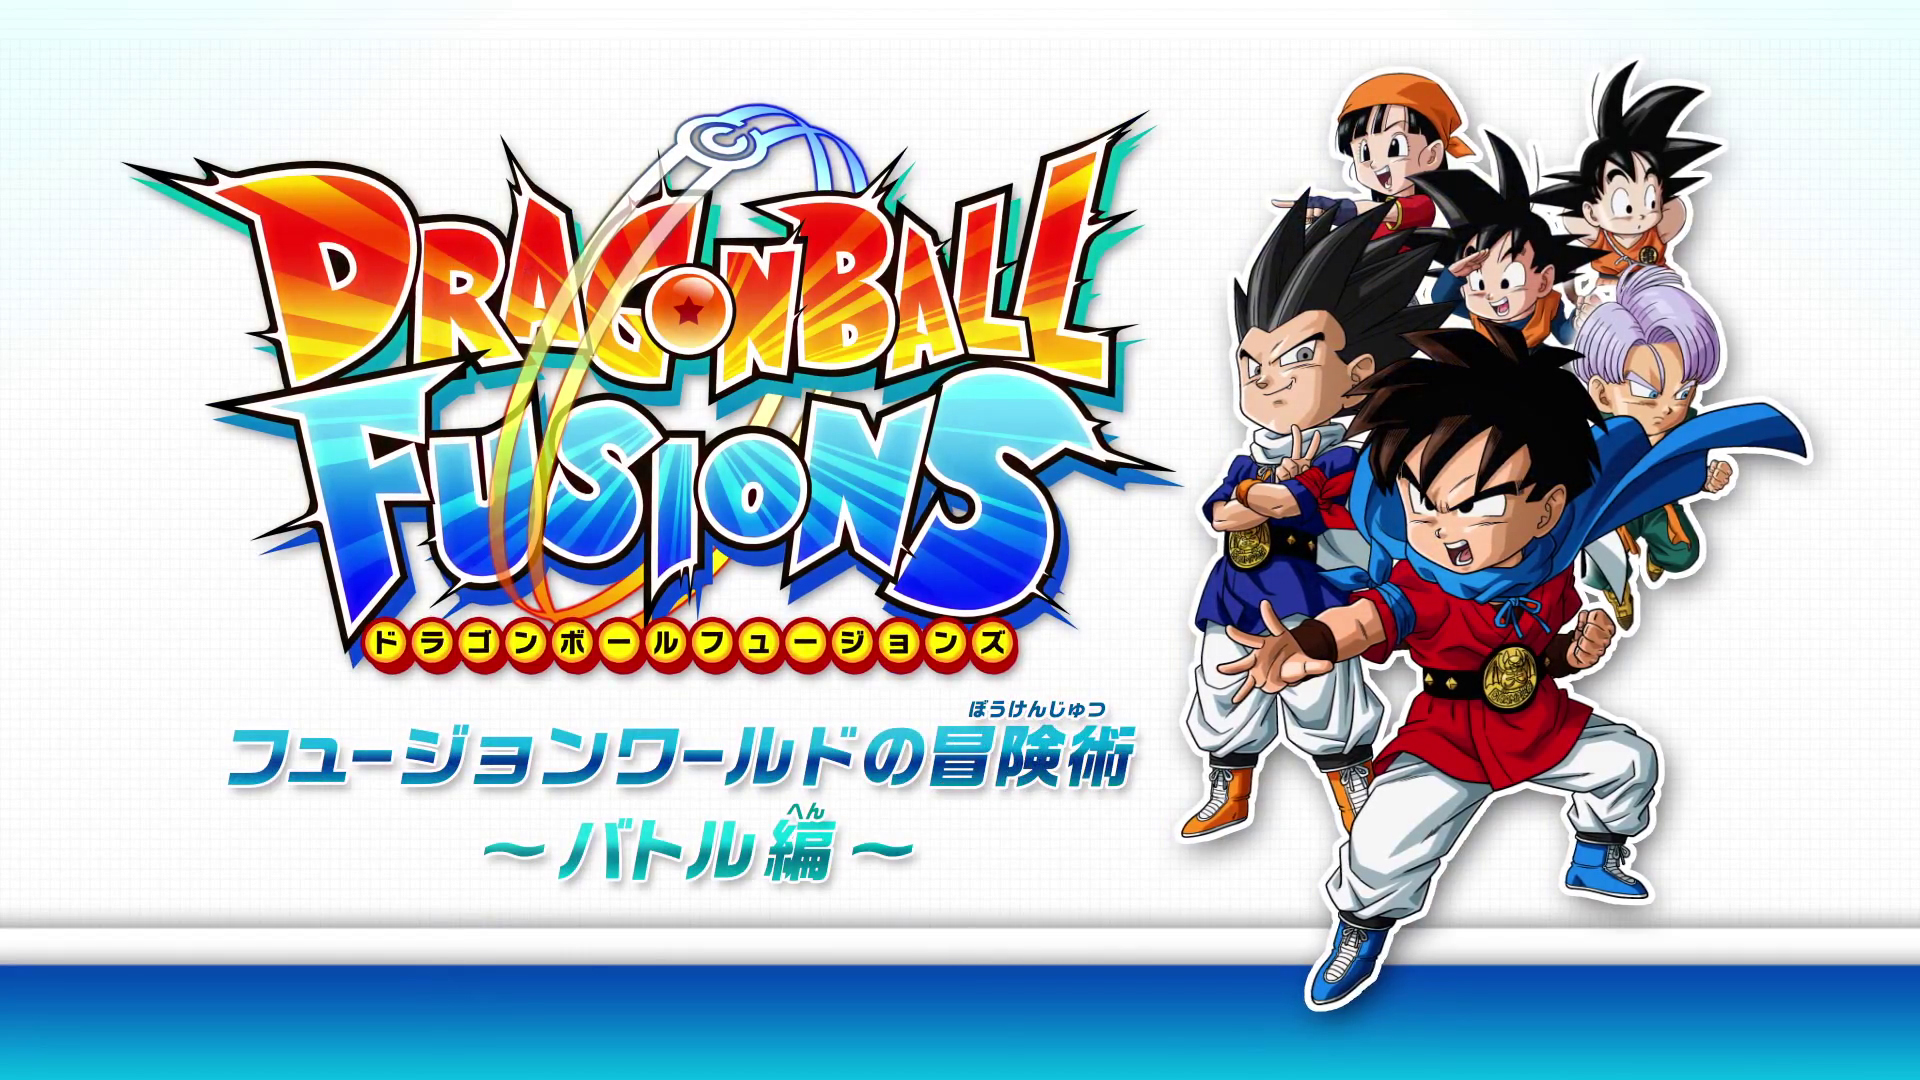 All Games Delta Dragon Ball Fusions Battle Gameplay Trailer